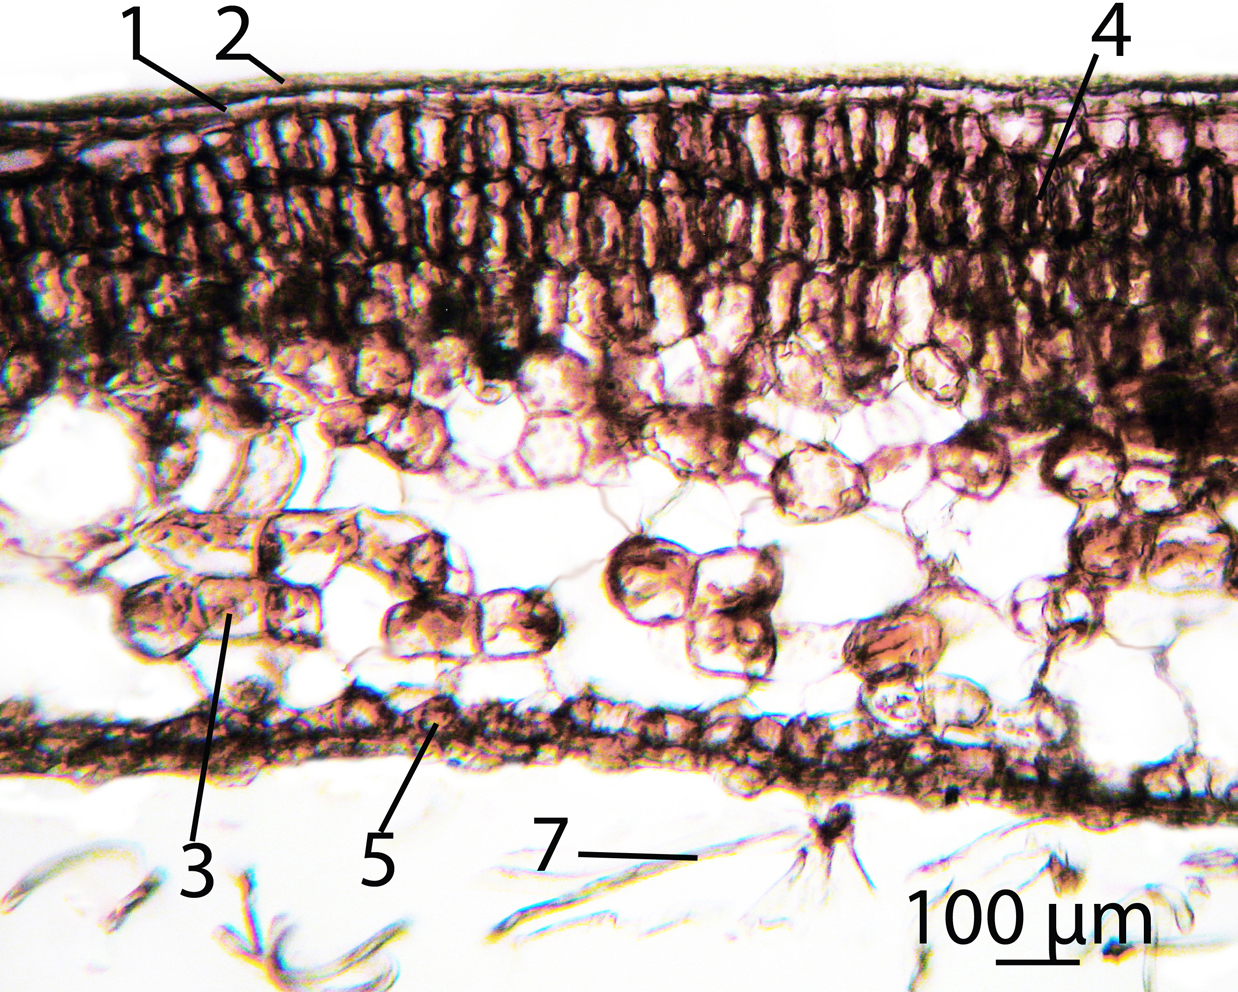 Fig. 2. Cross-section through the leaf blade of Rhododendron makinoi.